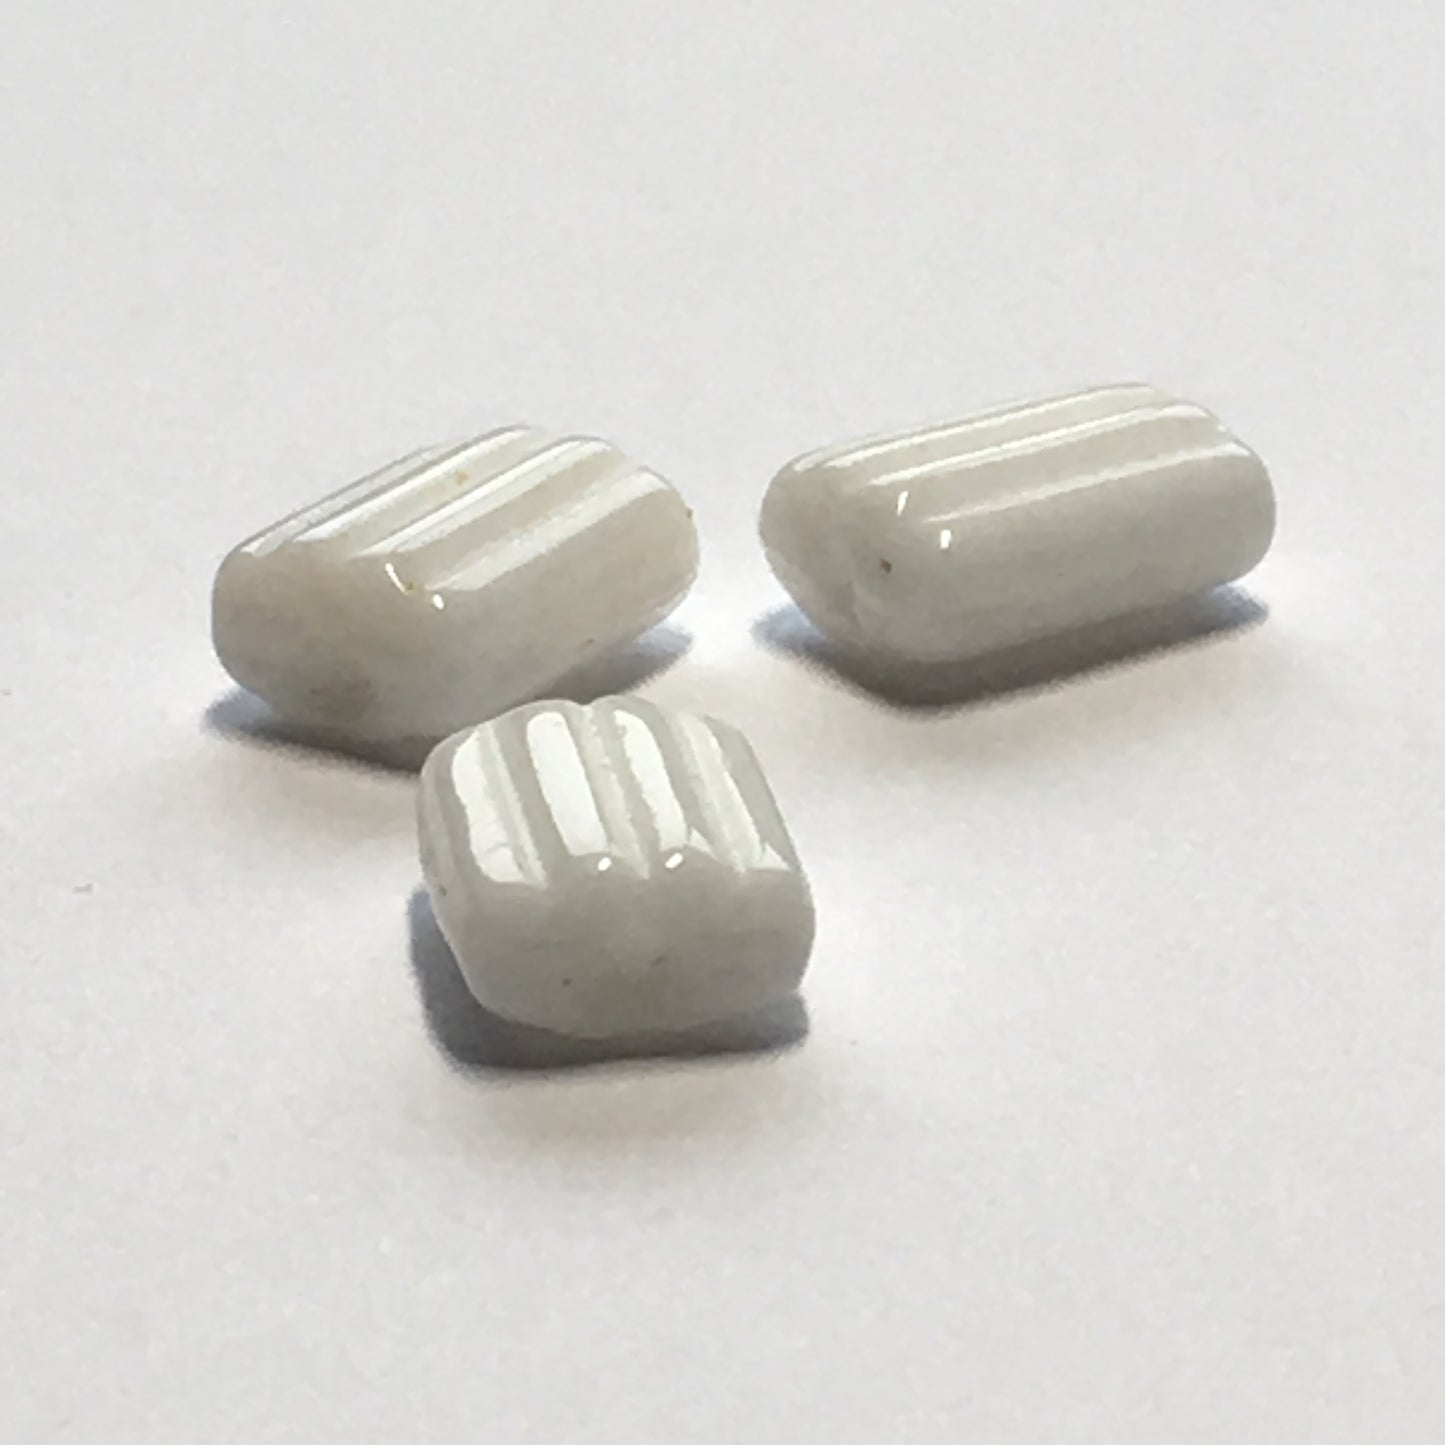 Opaque White Ribbed Glass Flat Rectangle Beads, 8 x 6 x 3 mm, 3 Beads